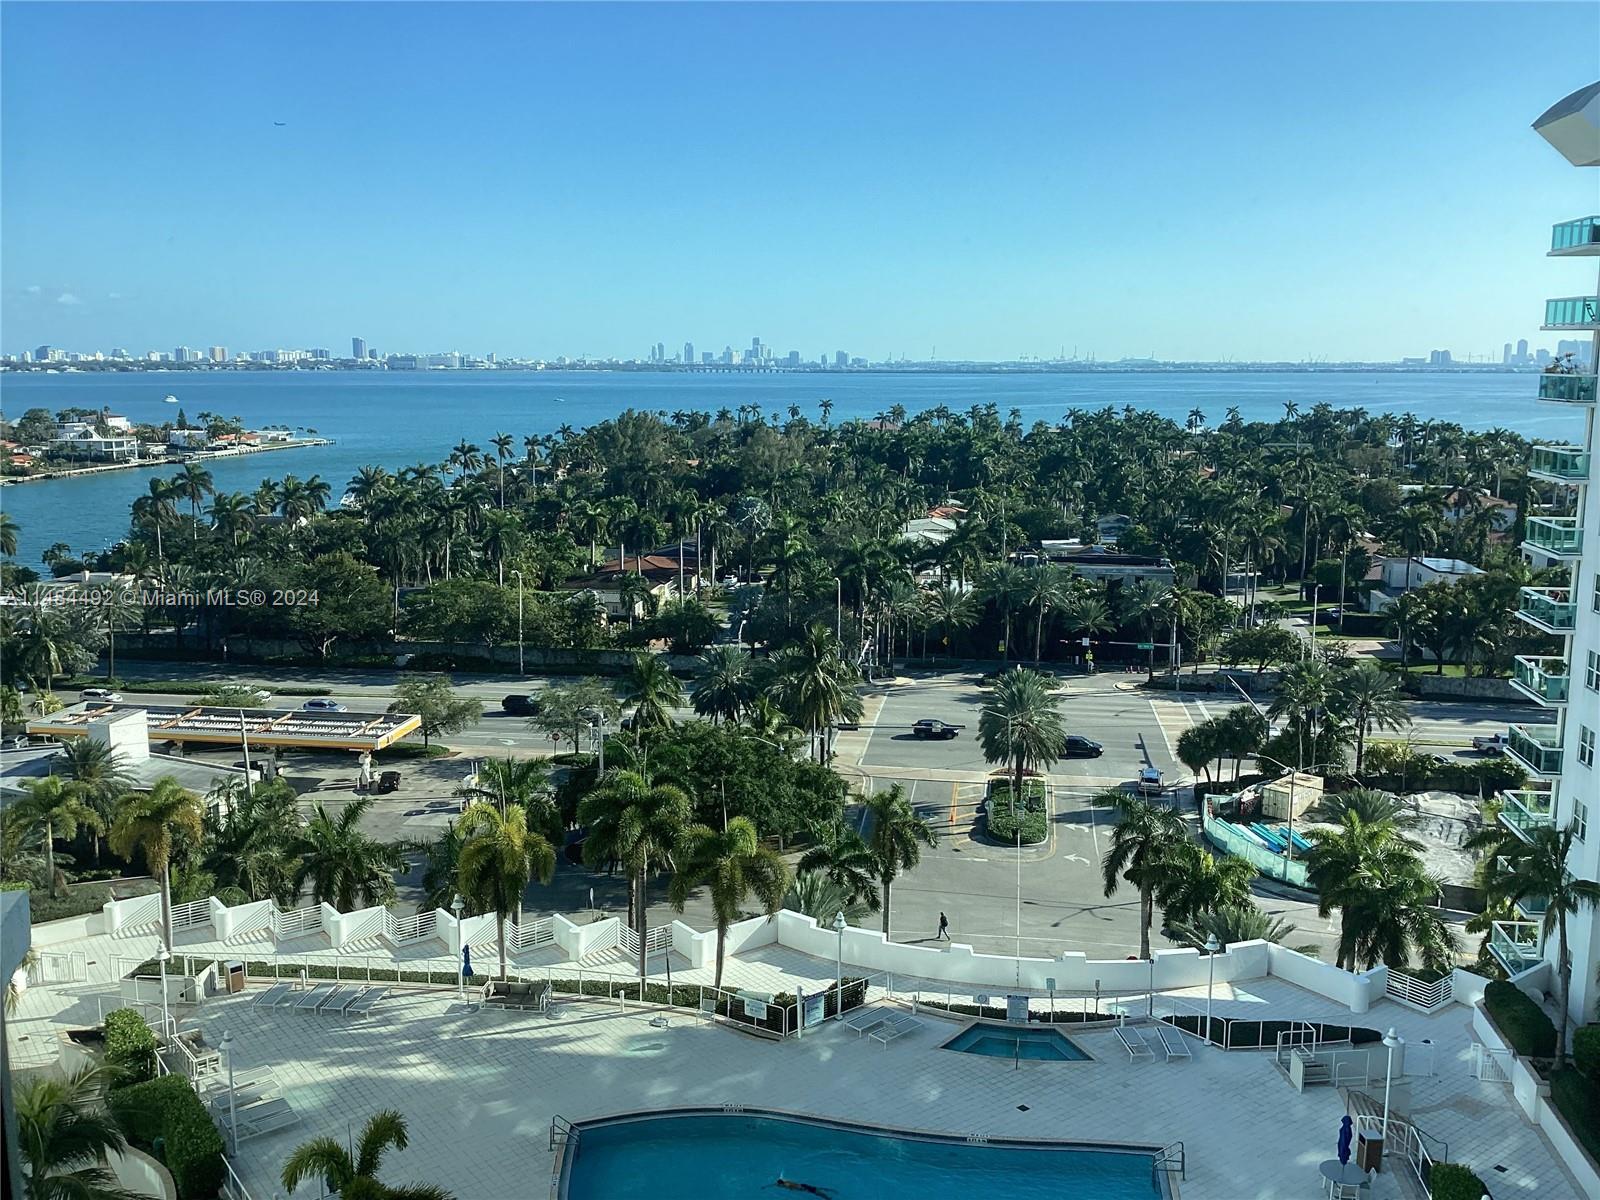 "Just reduced another $10,000 for quick sale" Unique opportunity for a pristine 2 bedroom, in a luxury building in a tropical community in booming North Bay Village. Gorgeous resort style pool, elegant lobby, large gym, fantastic sauna, great waterfront area for strolling, on site management. Spectacular southern view of Biscayne Bay and downtown Miami from a huge patio. Granite kitchen, wood cabinets, washer, dryer. Unlimited Valet Service. Kayak and paddle board launch area. Very close to restaurants and a brand new 36000 sq foot Publix coming soon. Apt come with two assigned parking spaces # 2128 and #2112 and can be rented immediately. Bring your pickiest client…unit sells itself.